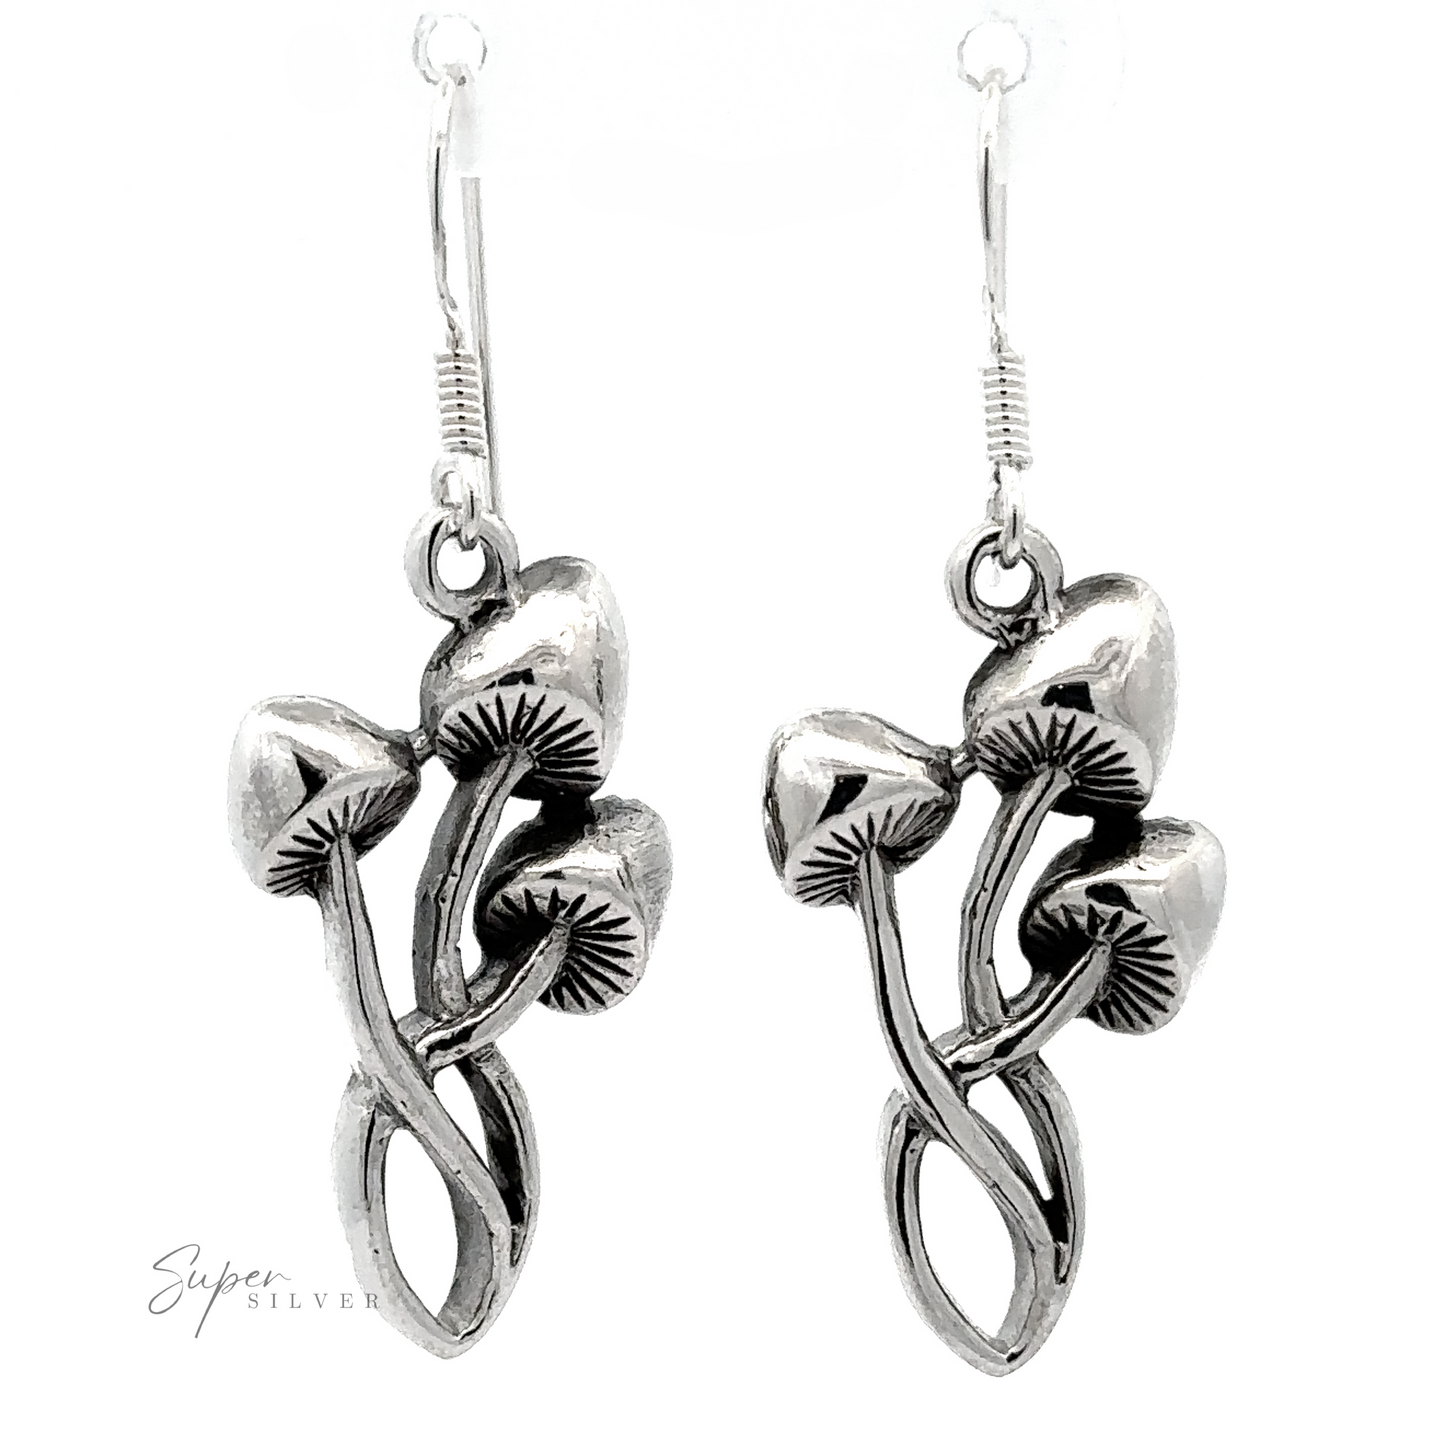 Pair of Mushroom Earrings shaped like mushrooms with nature-inspired charm, against a white background.